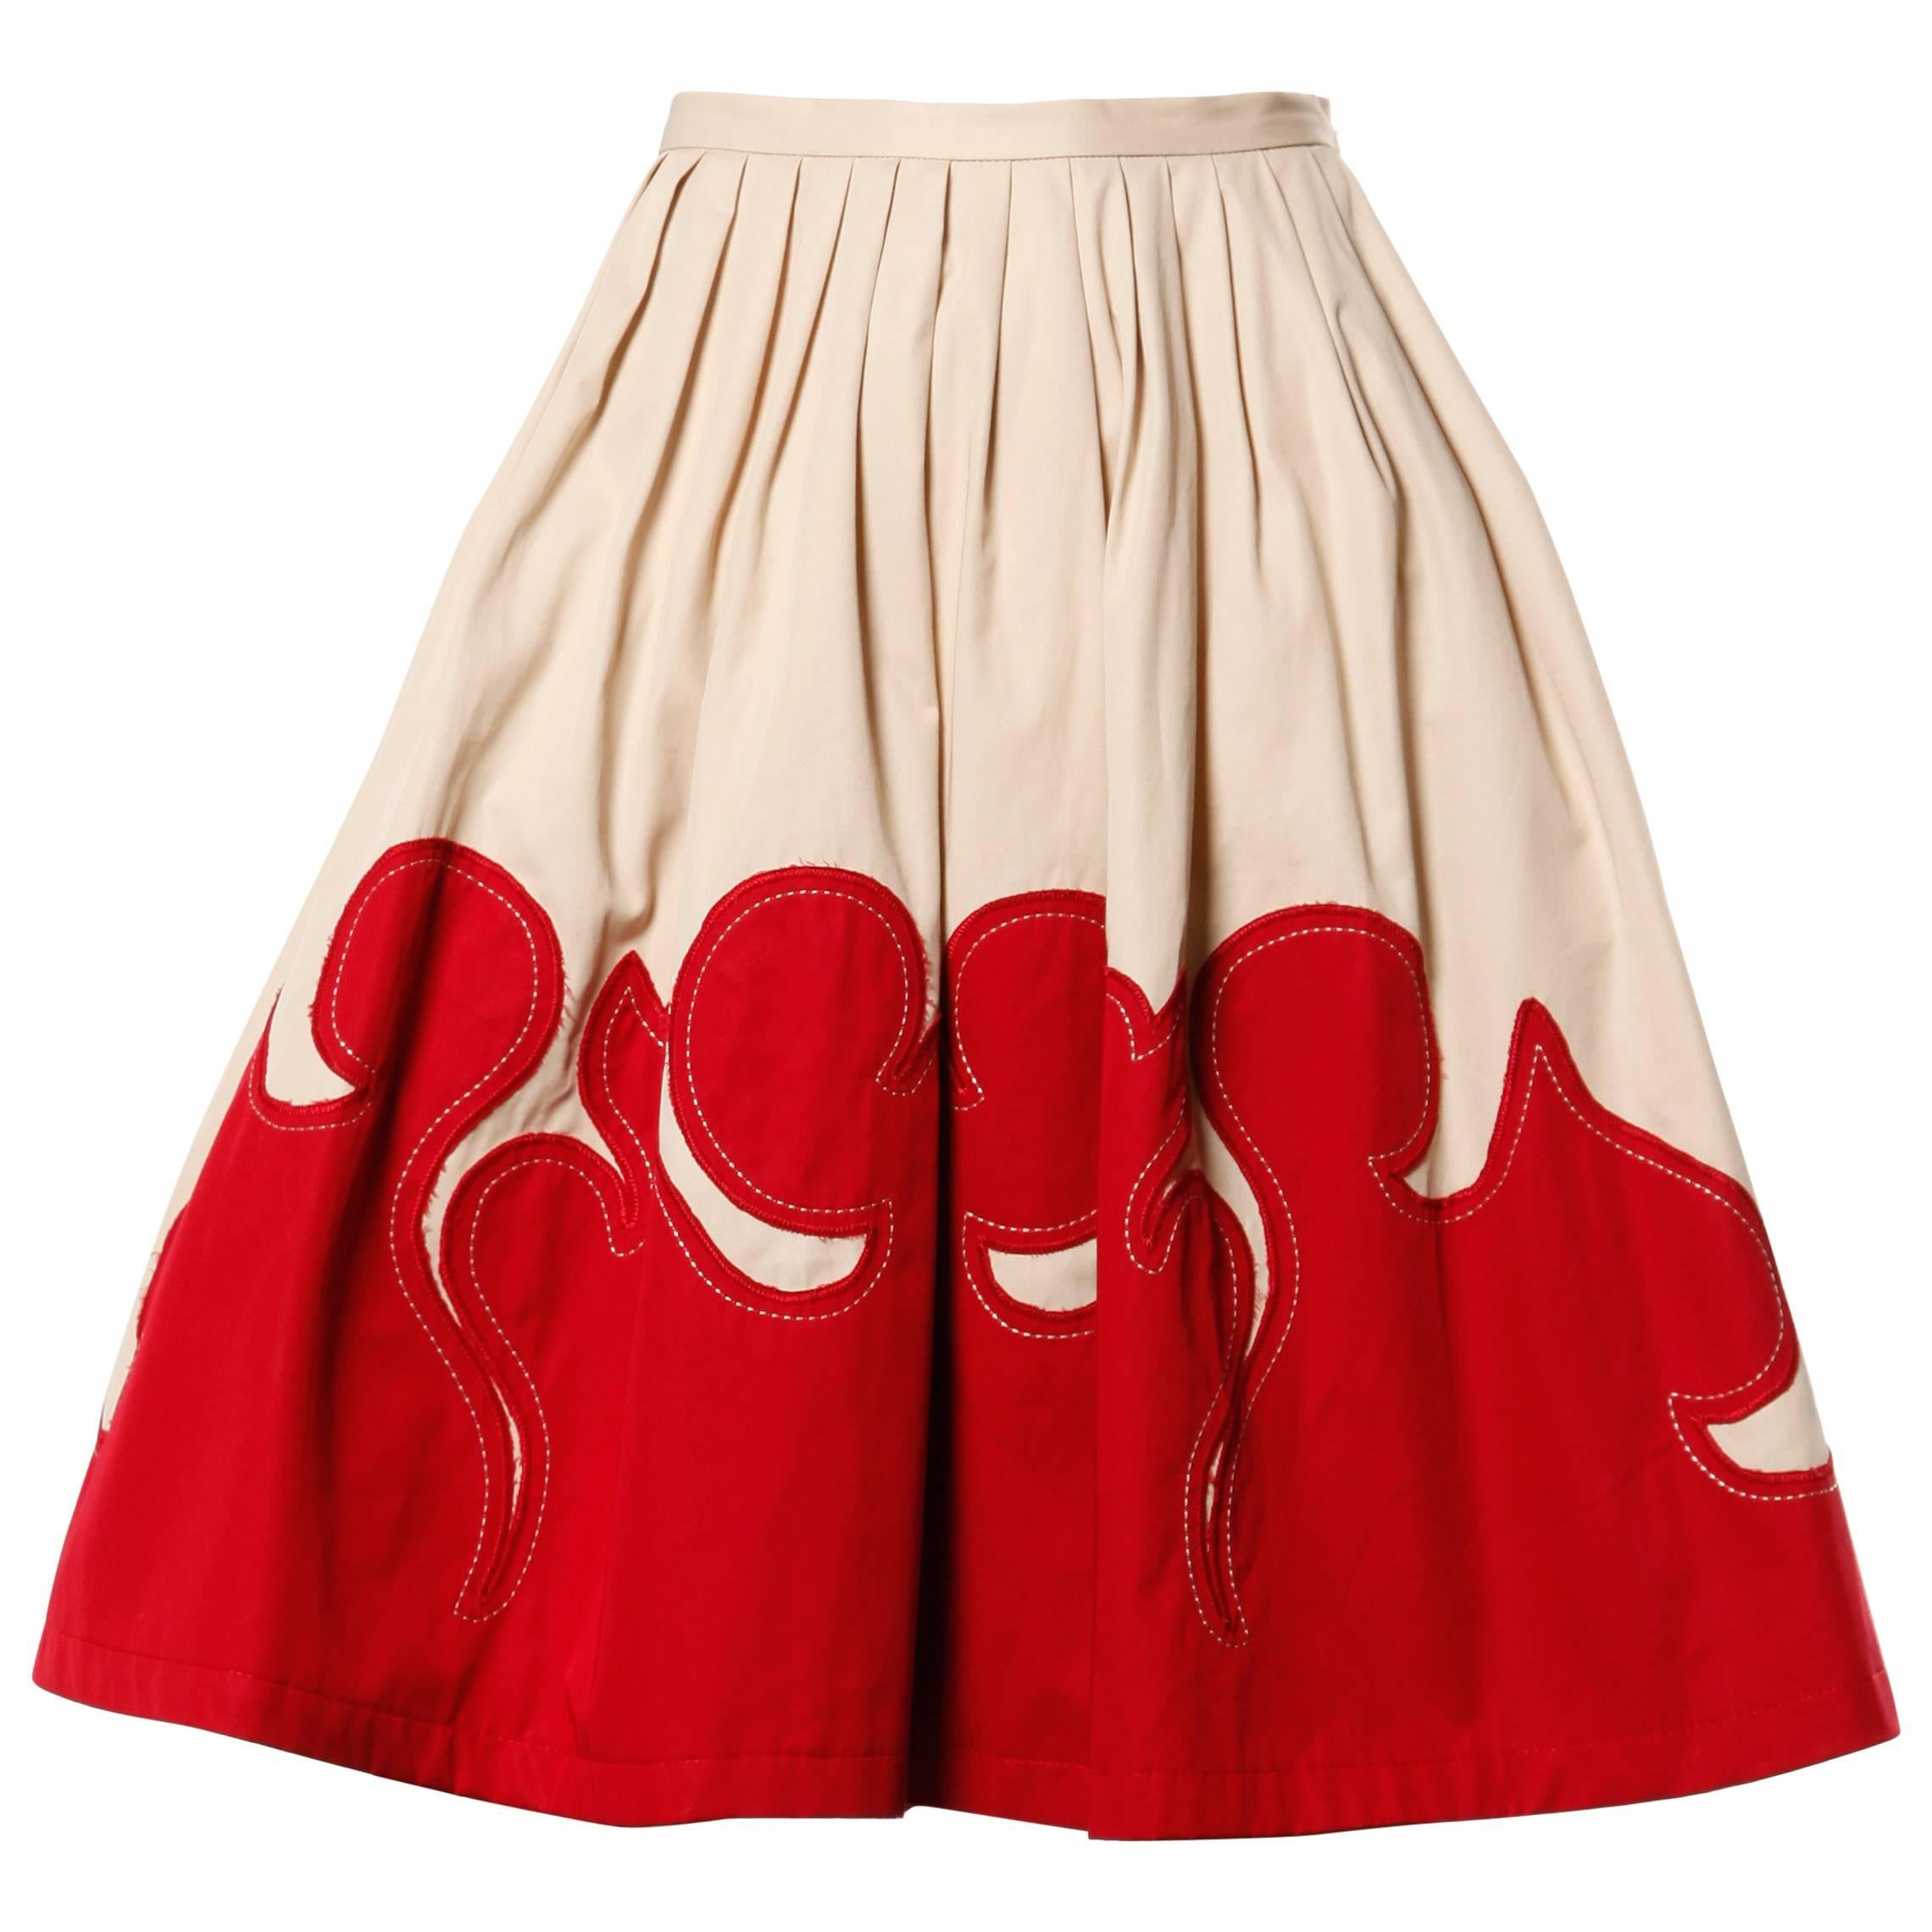 Moschino Vintage Red + Tan Cotton Patchwork Skirt with a Full Sweep